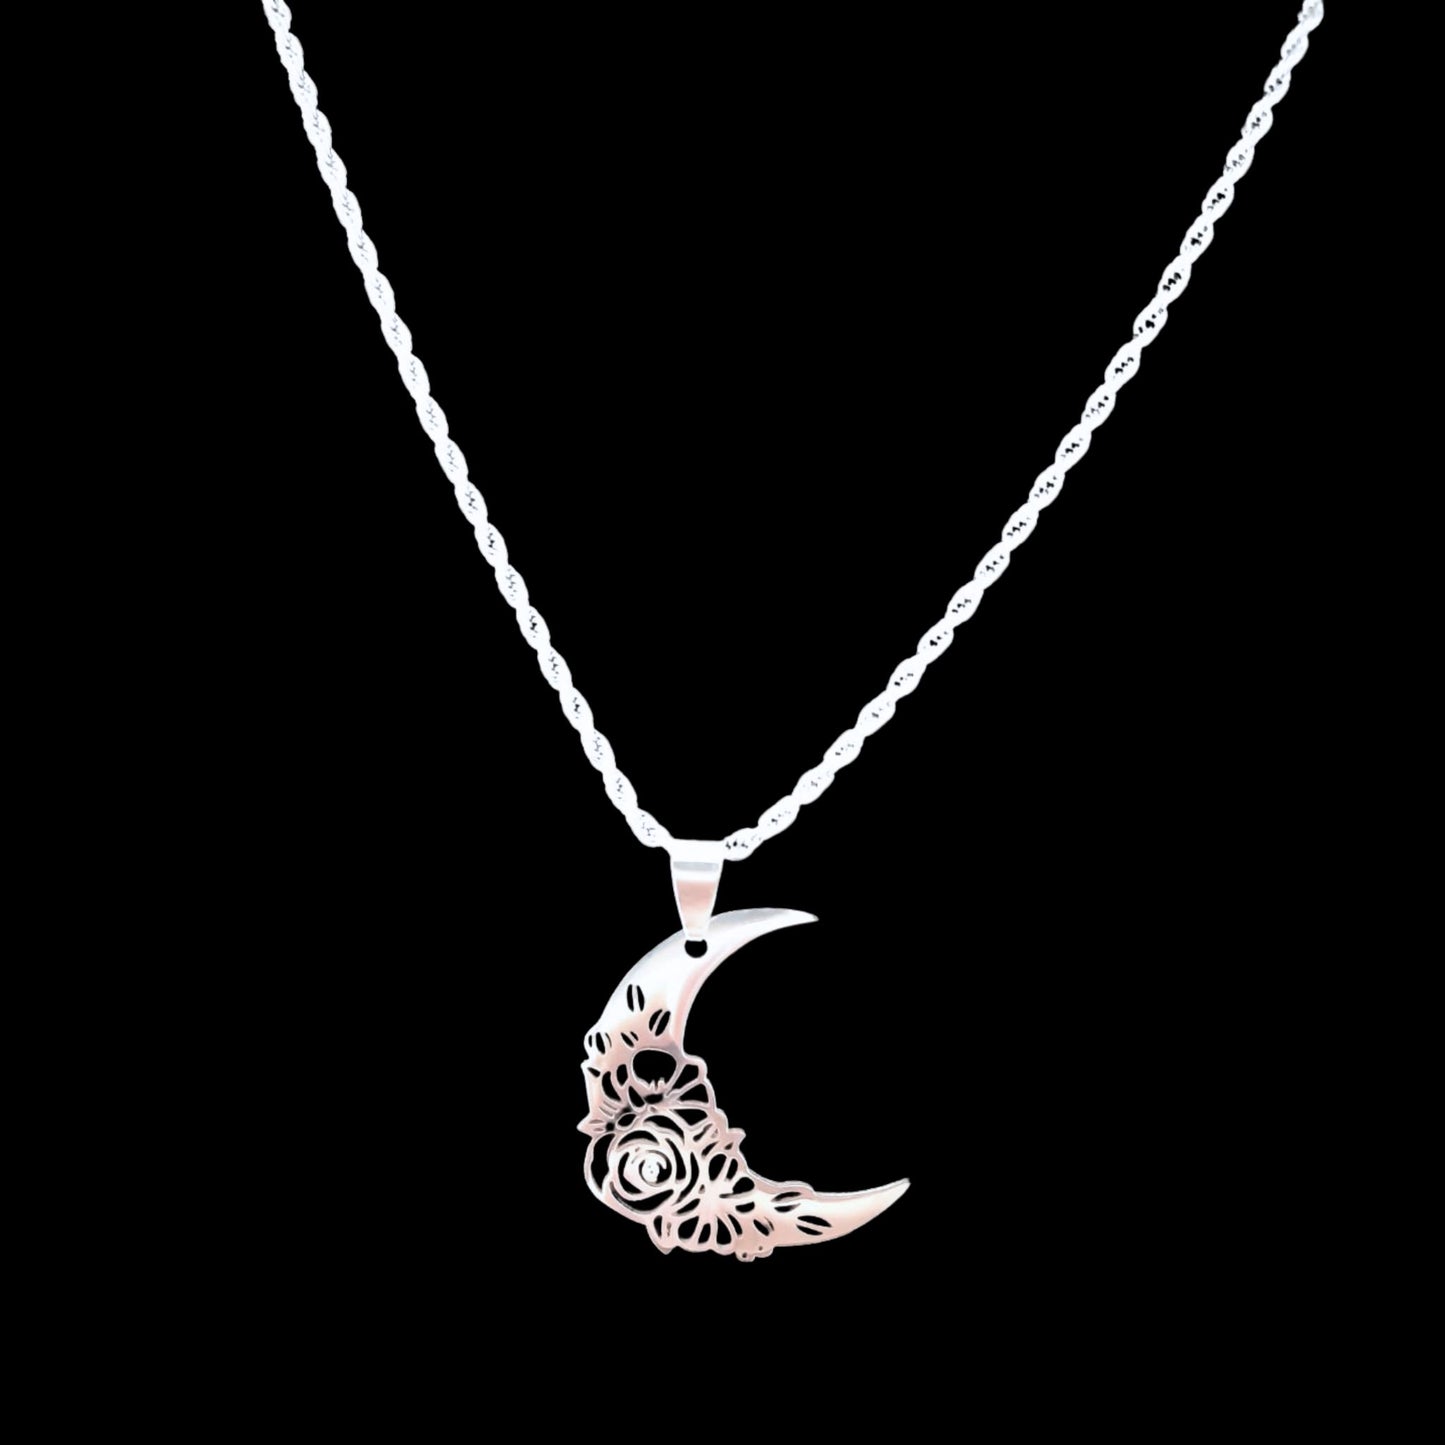 Rose Moon Stainless Steel Pendant with Chain